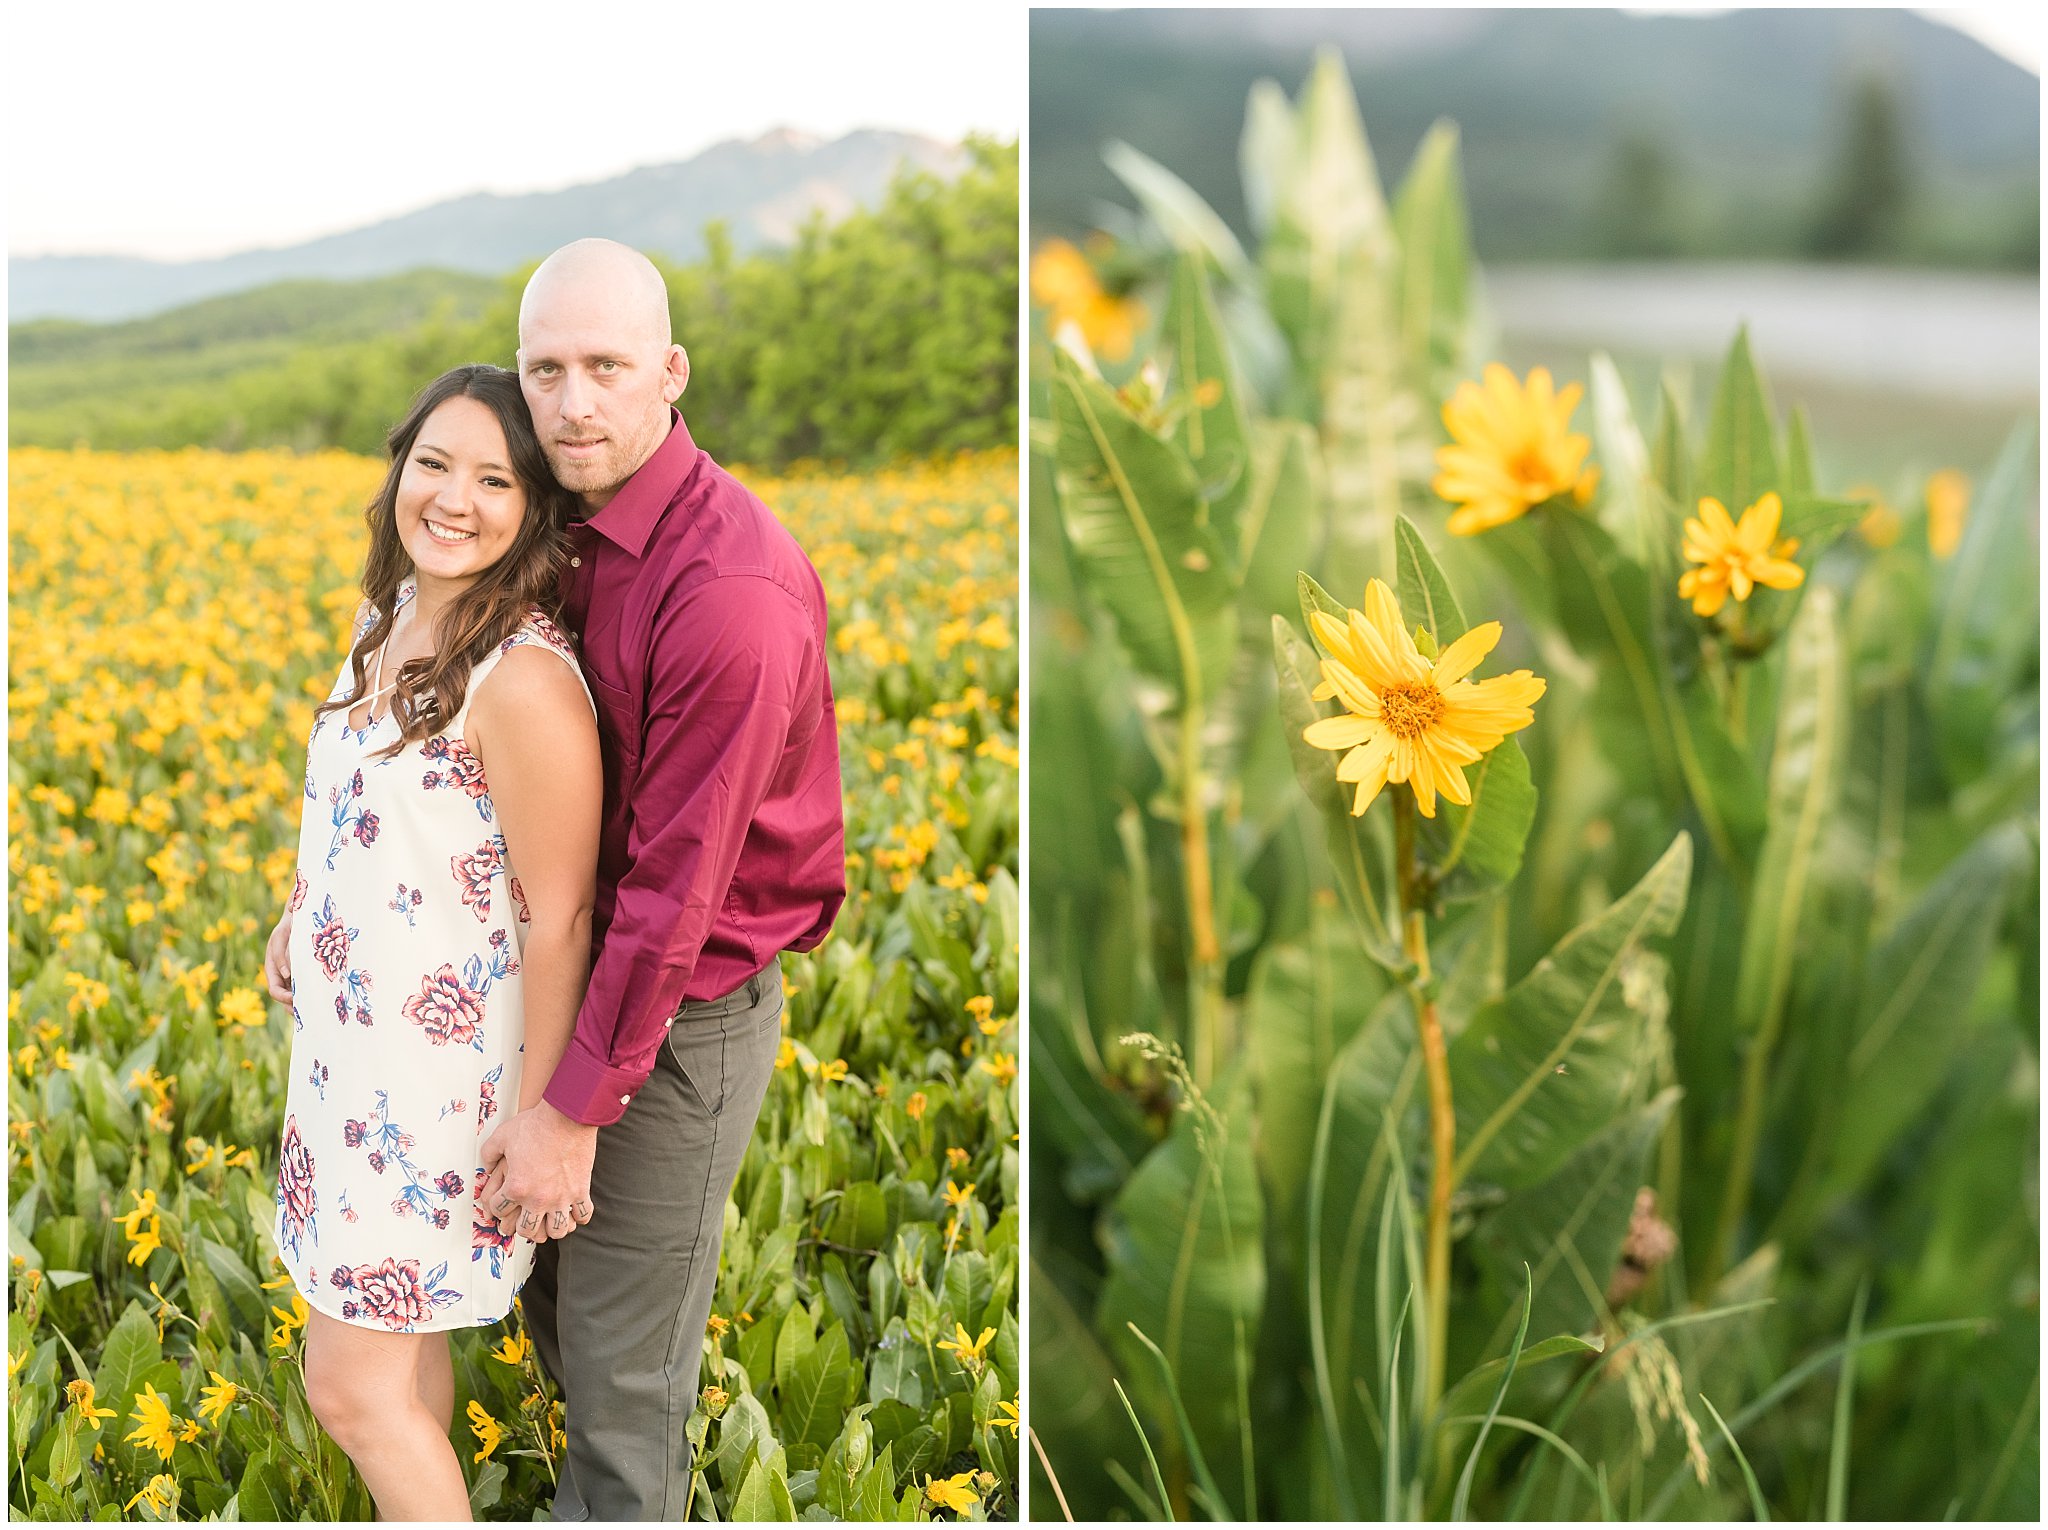 Couple's romantic engagement session in the mountains with wildflowers and sunflowers | Snowbasin Utah Engagements